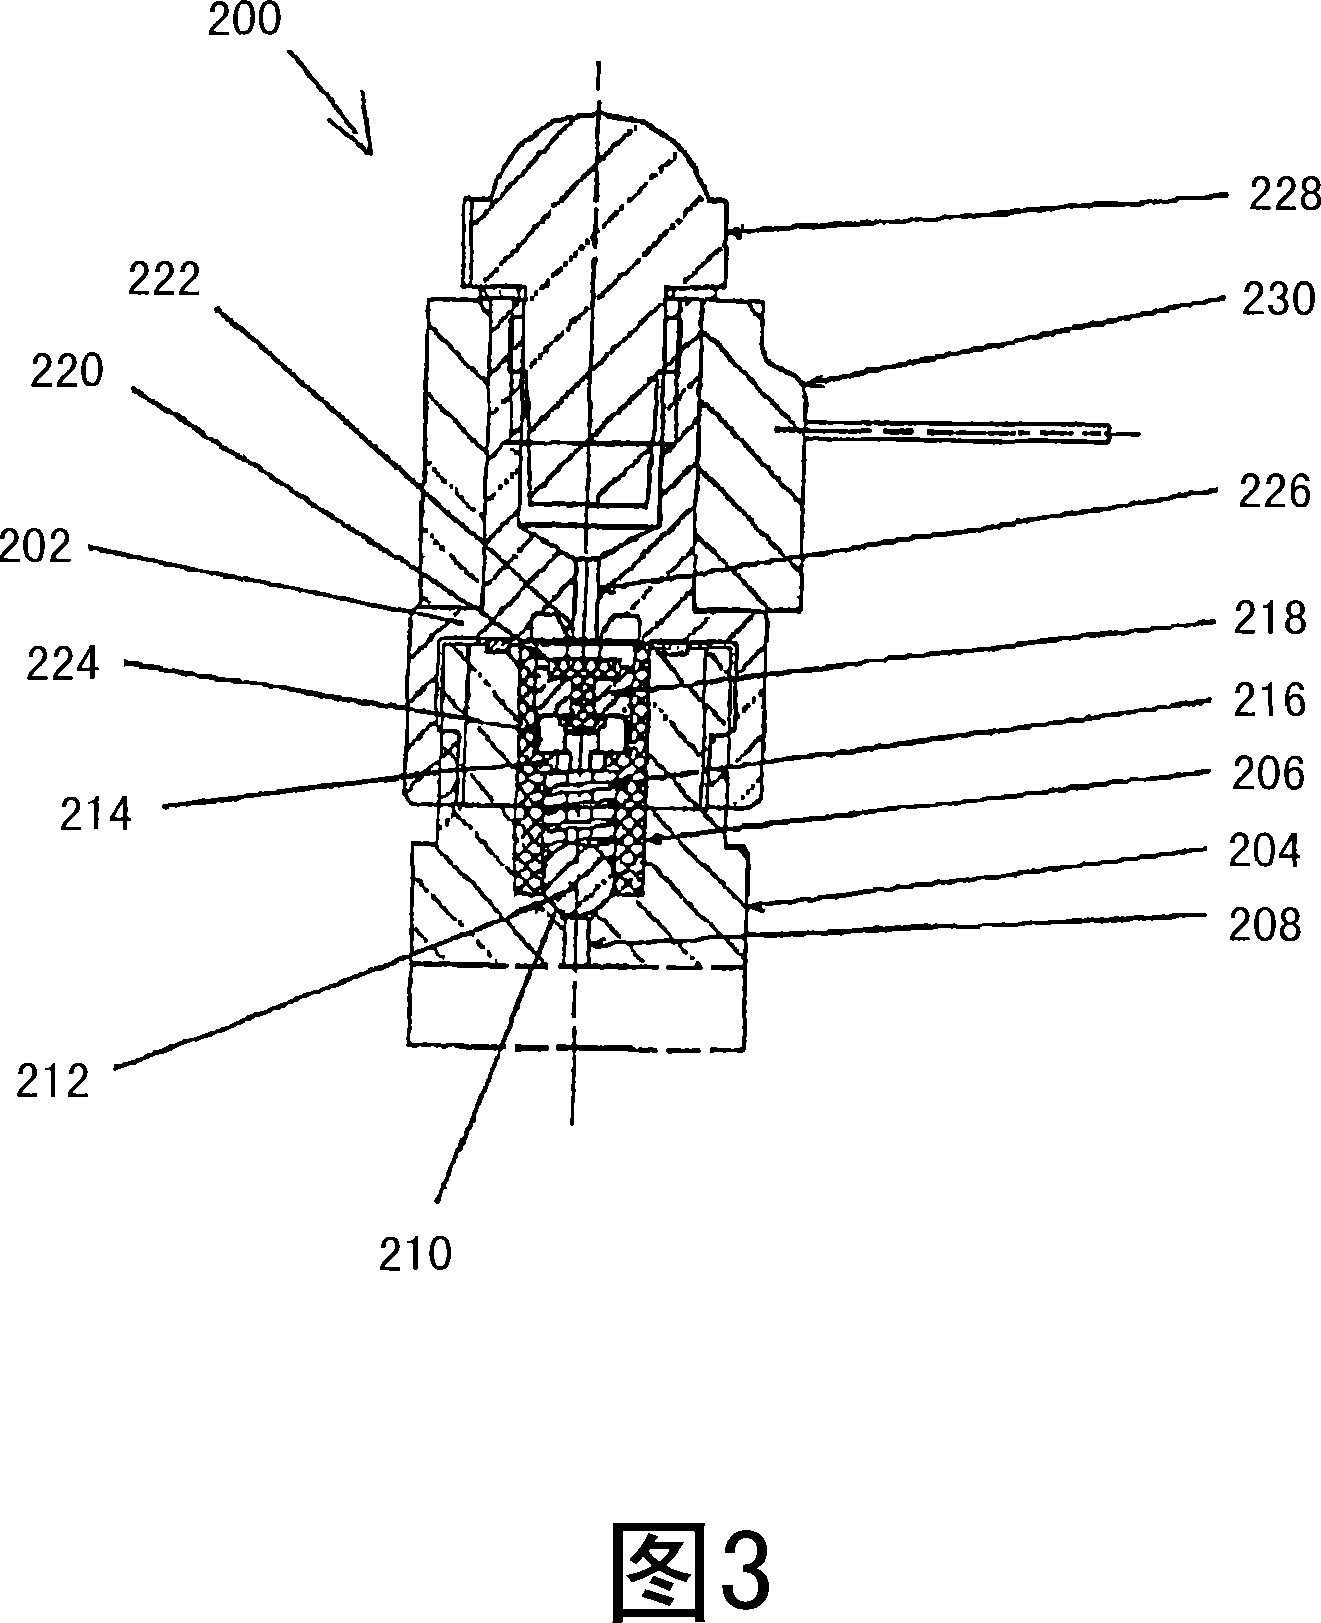 Motor vehicle heating system and method for pre-heating liquid fuel